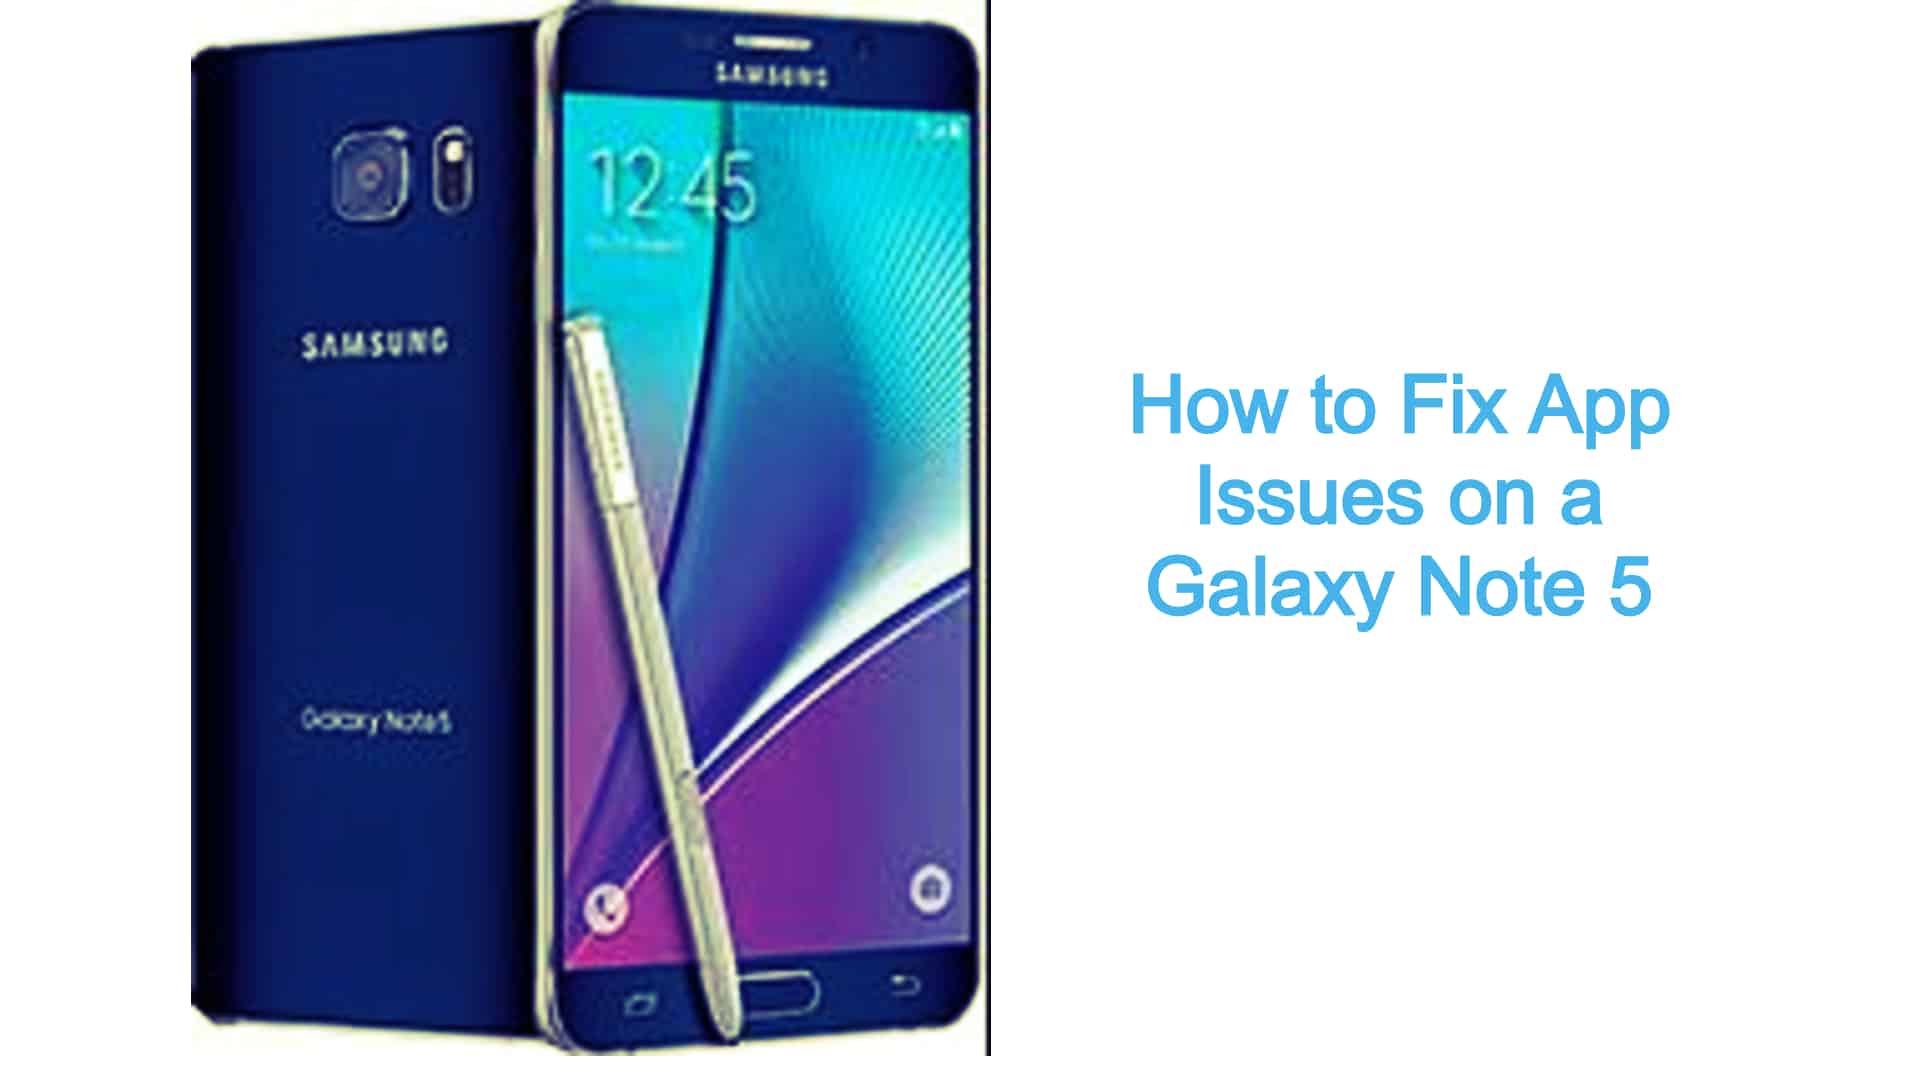 How to Fix App Issues on a Galaxy Note 5 - Quick Fix